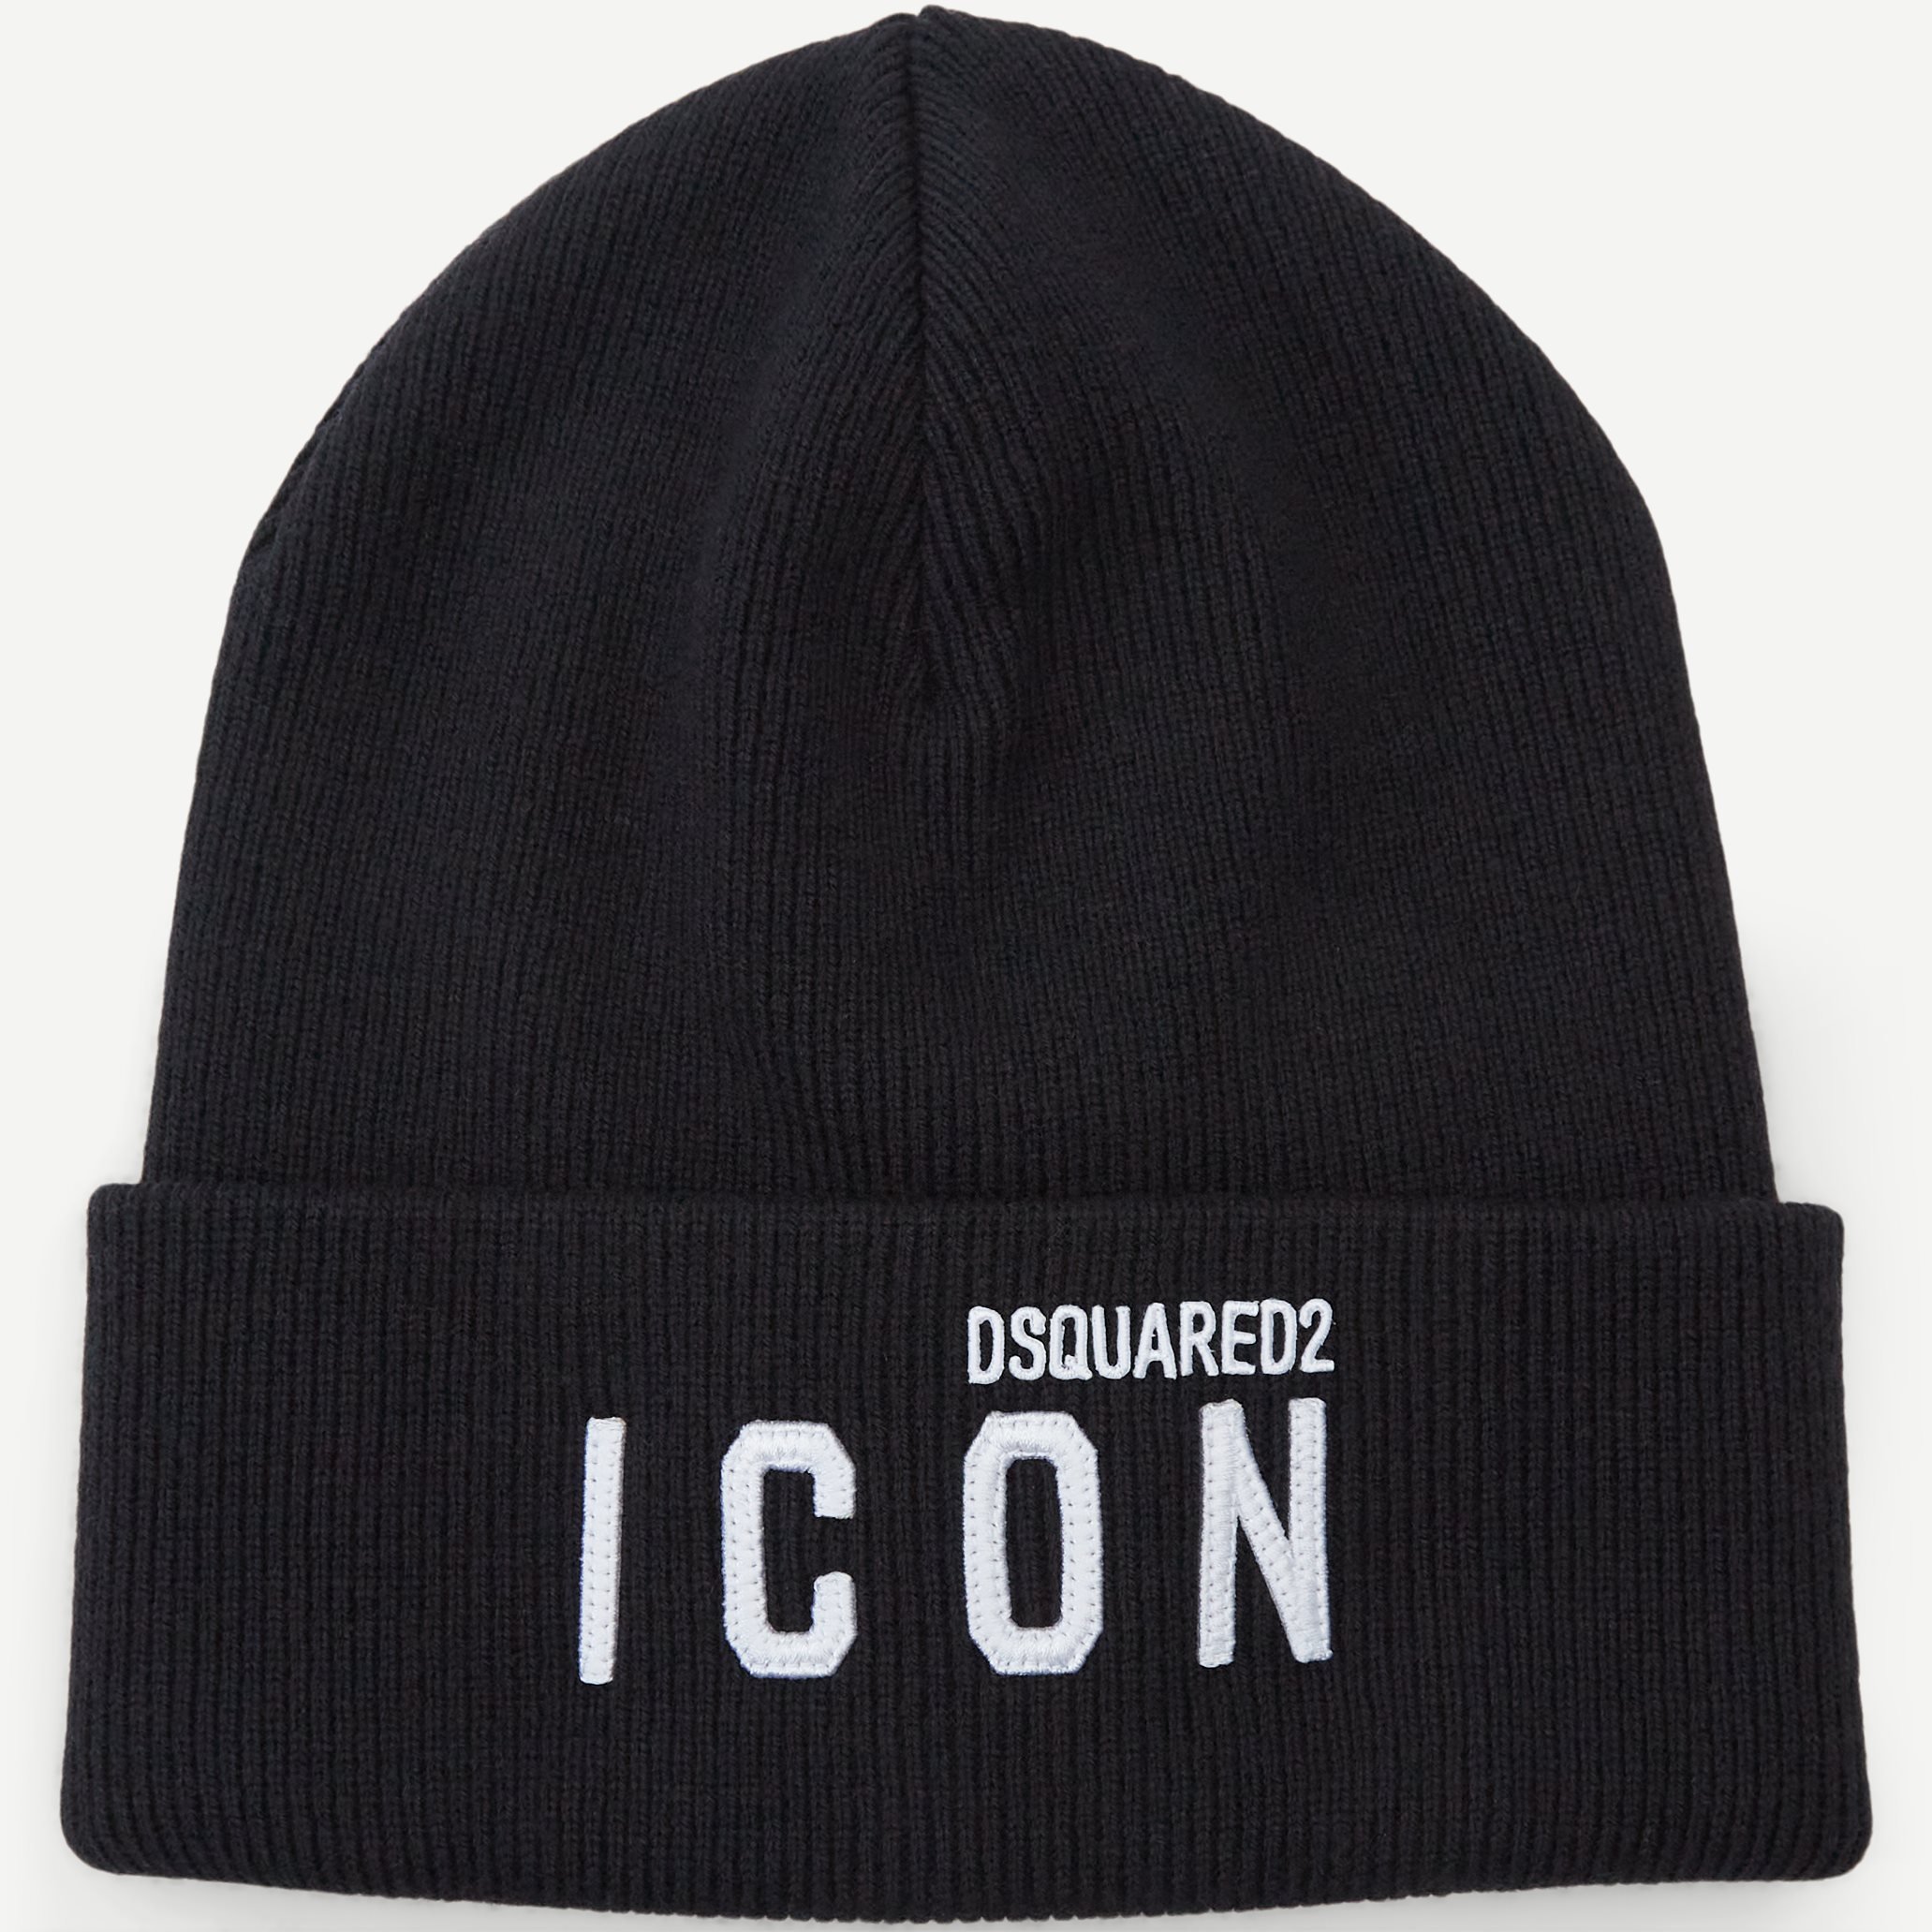 Dsquared2 Beanies KNM0001 01W04331 Black